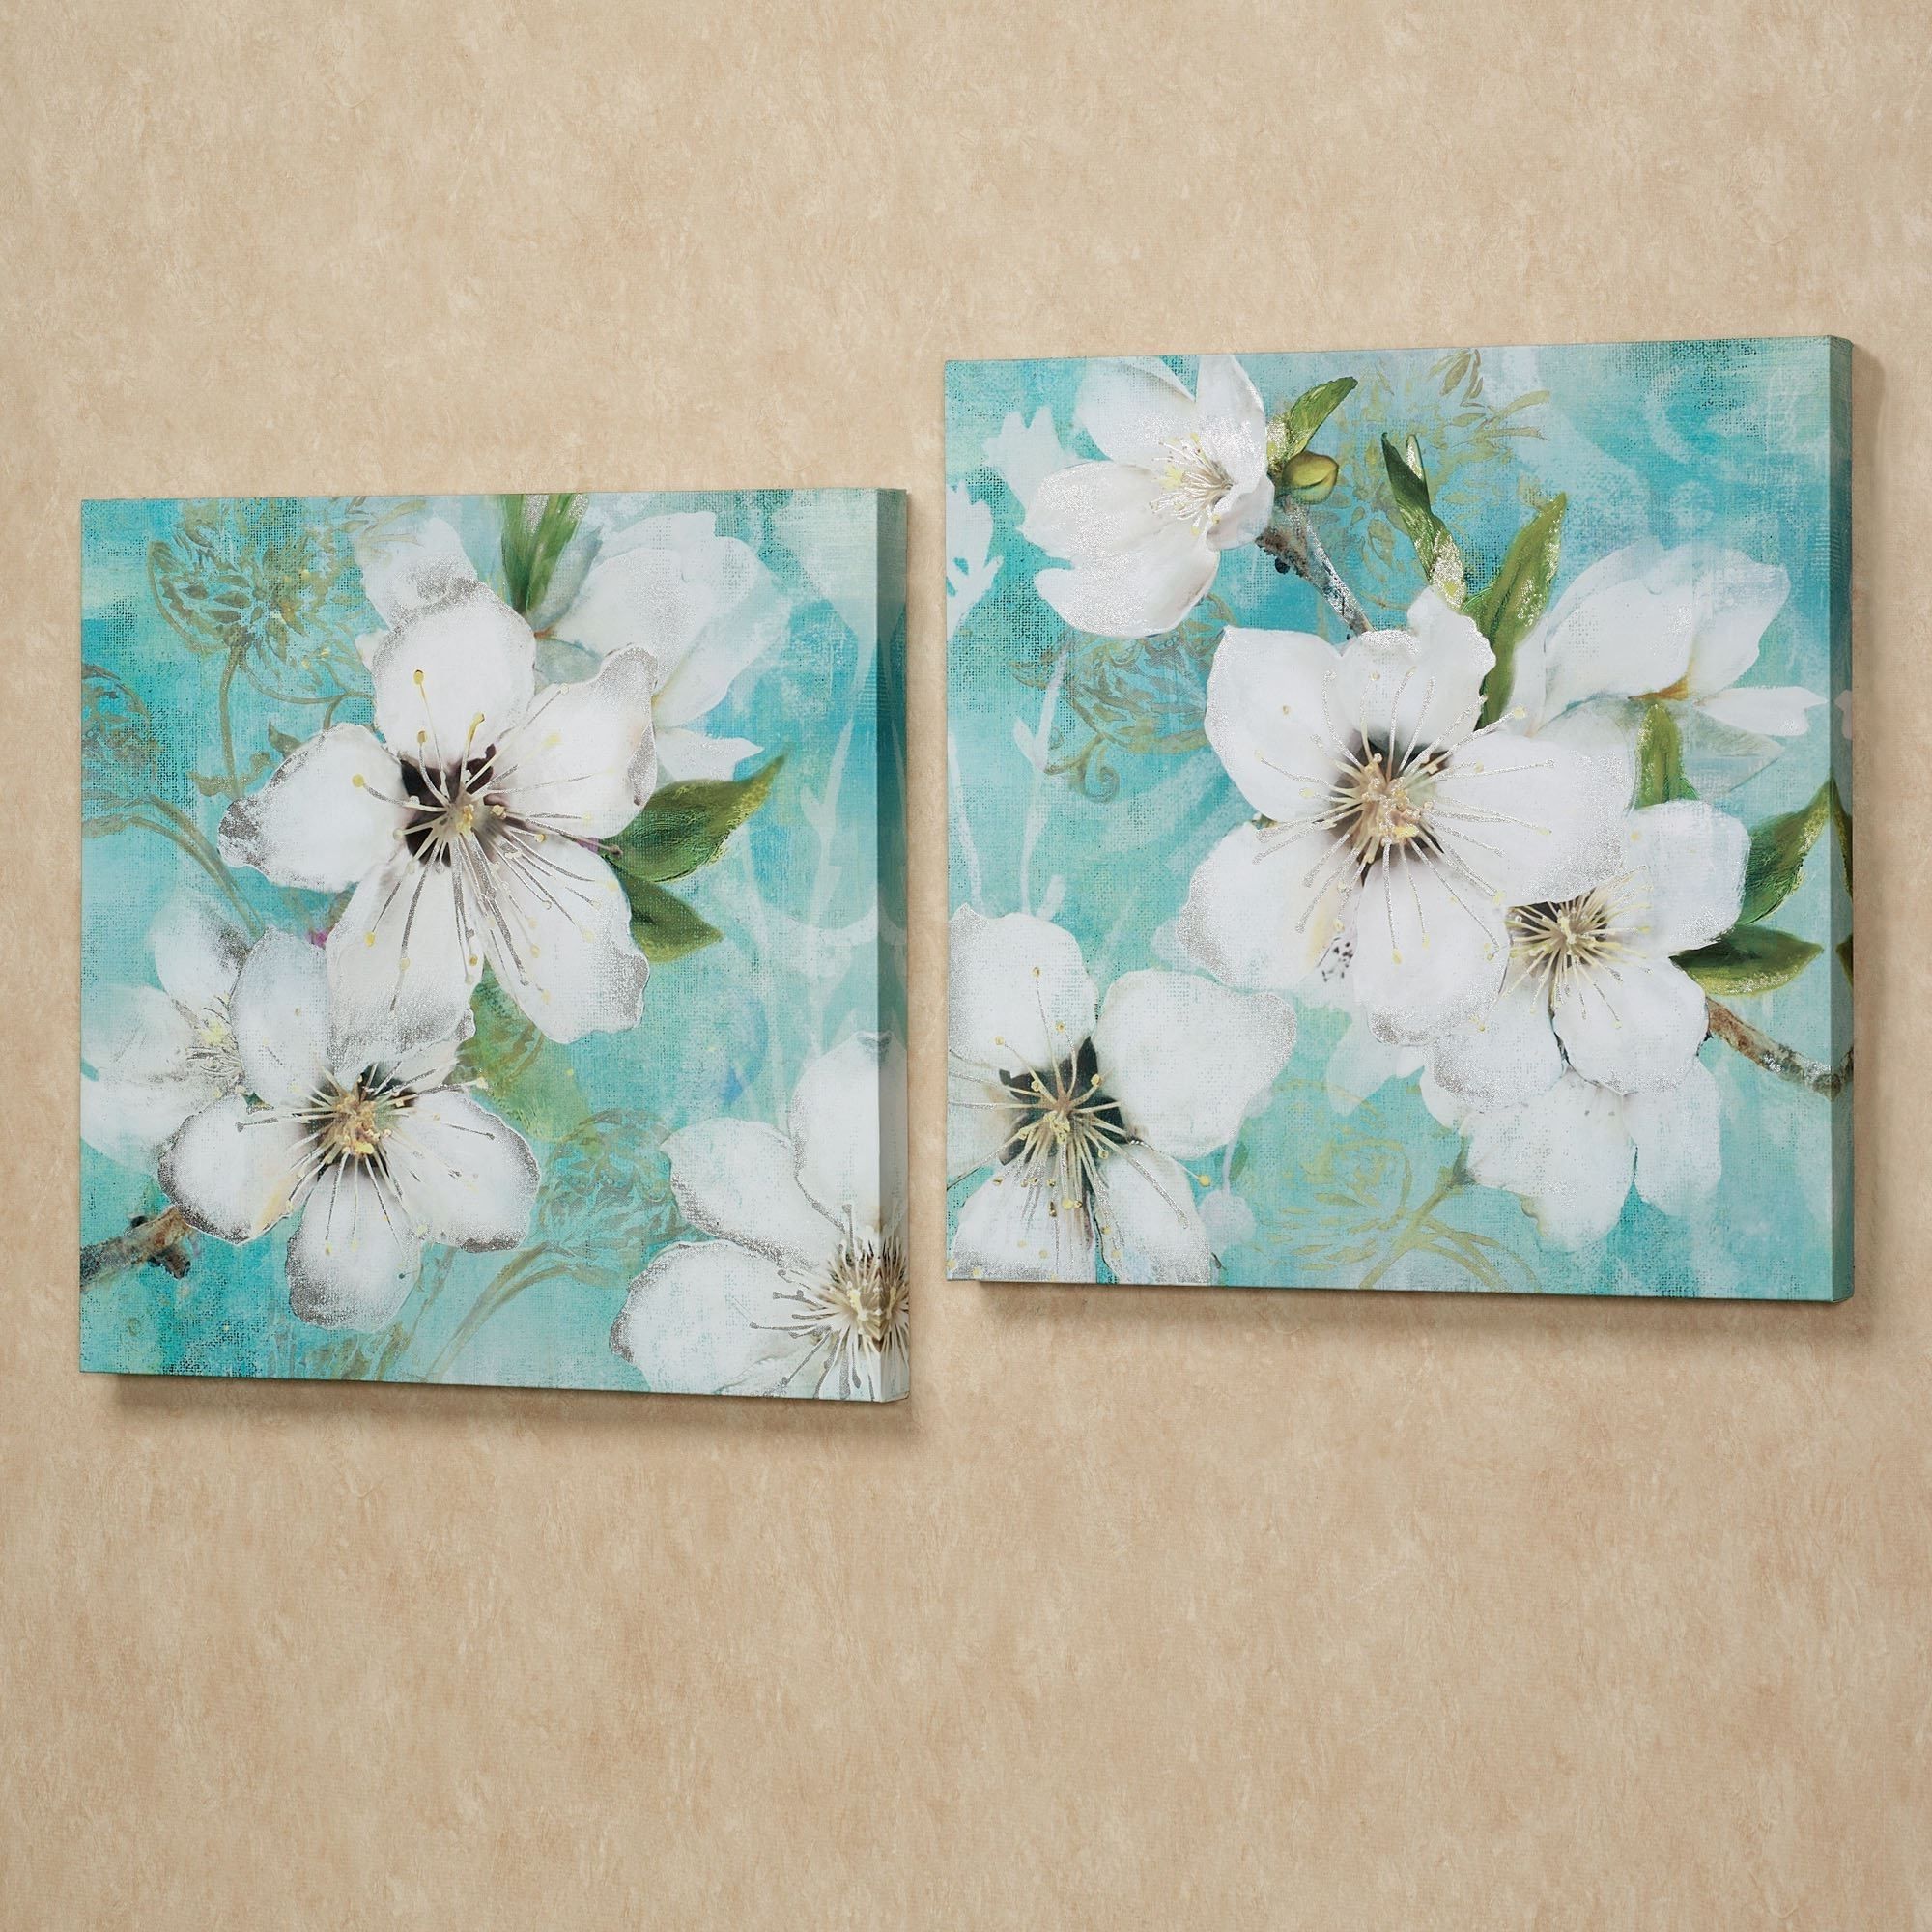 Wall Art: Best Pictures Flower Canvas Wall Art Large Floral Wall Intended For Well Known Flower Wall Art Canvas (View 7 of 15)